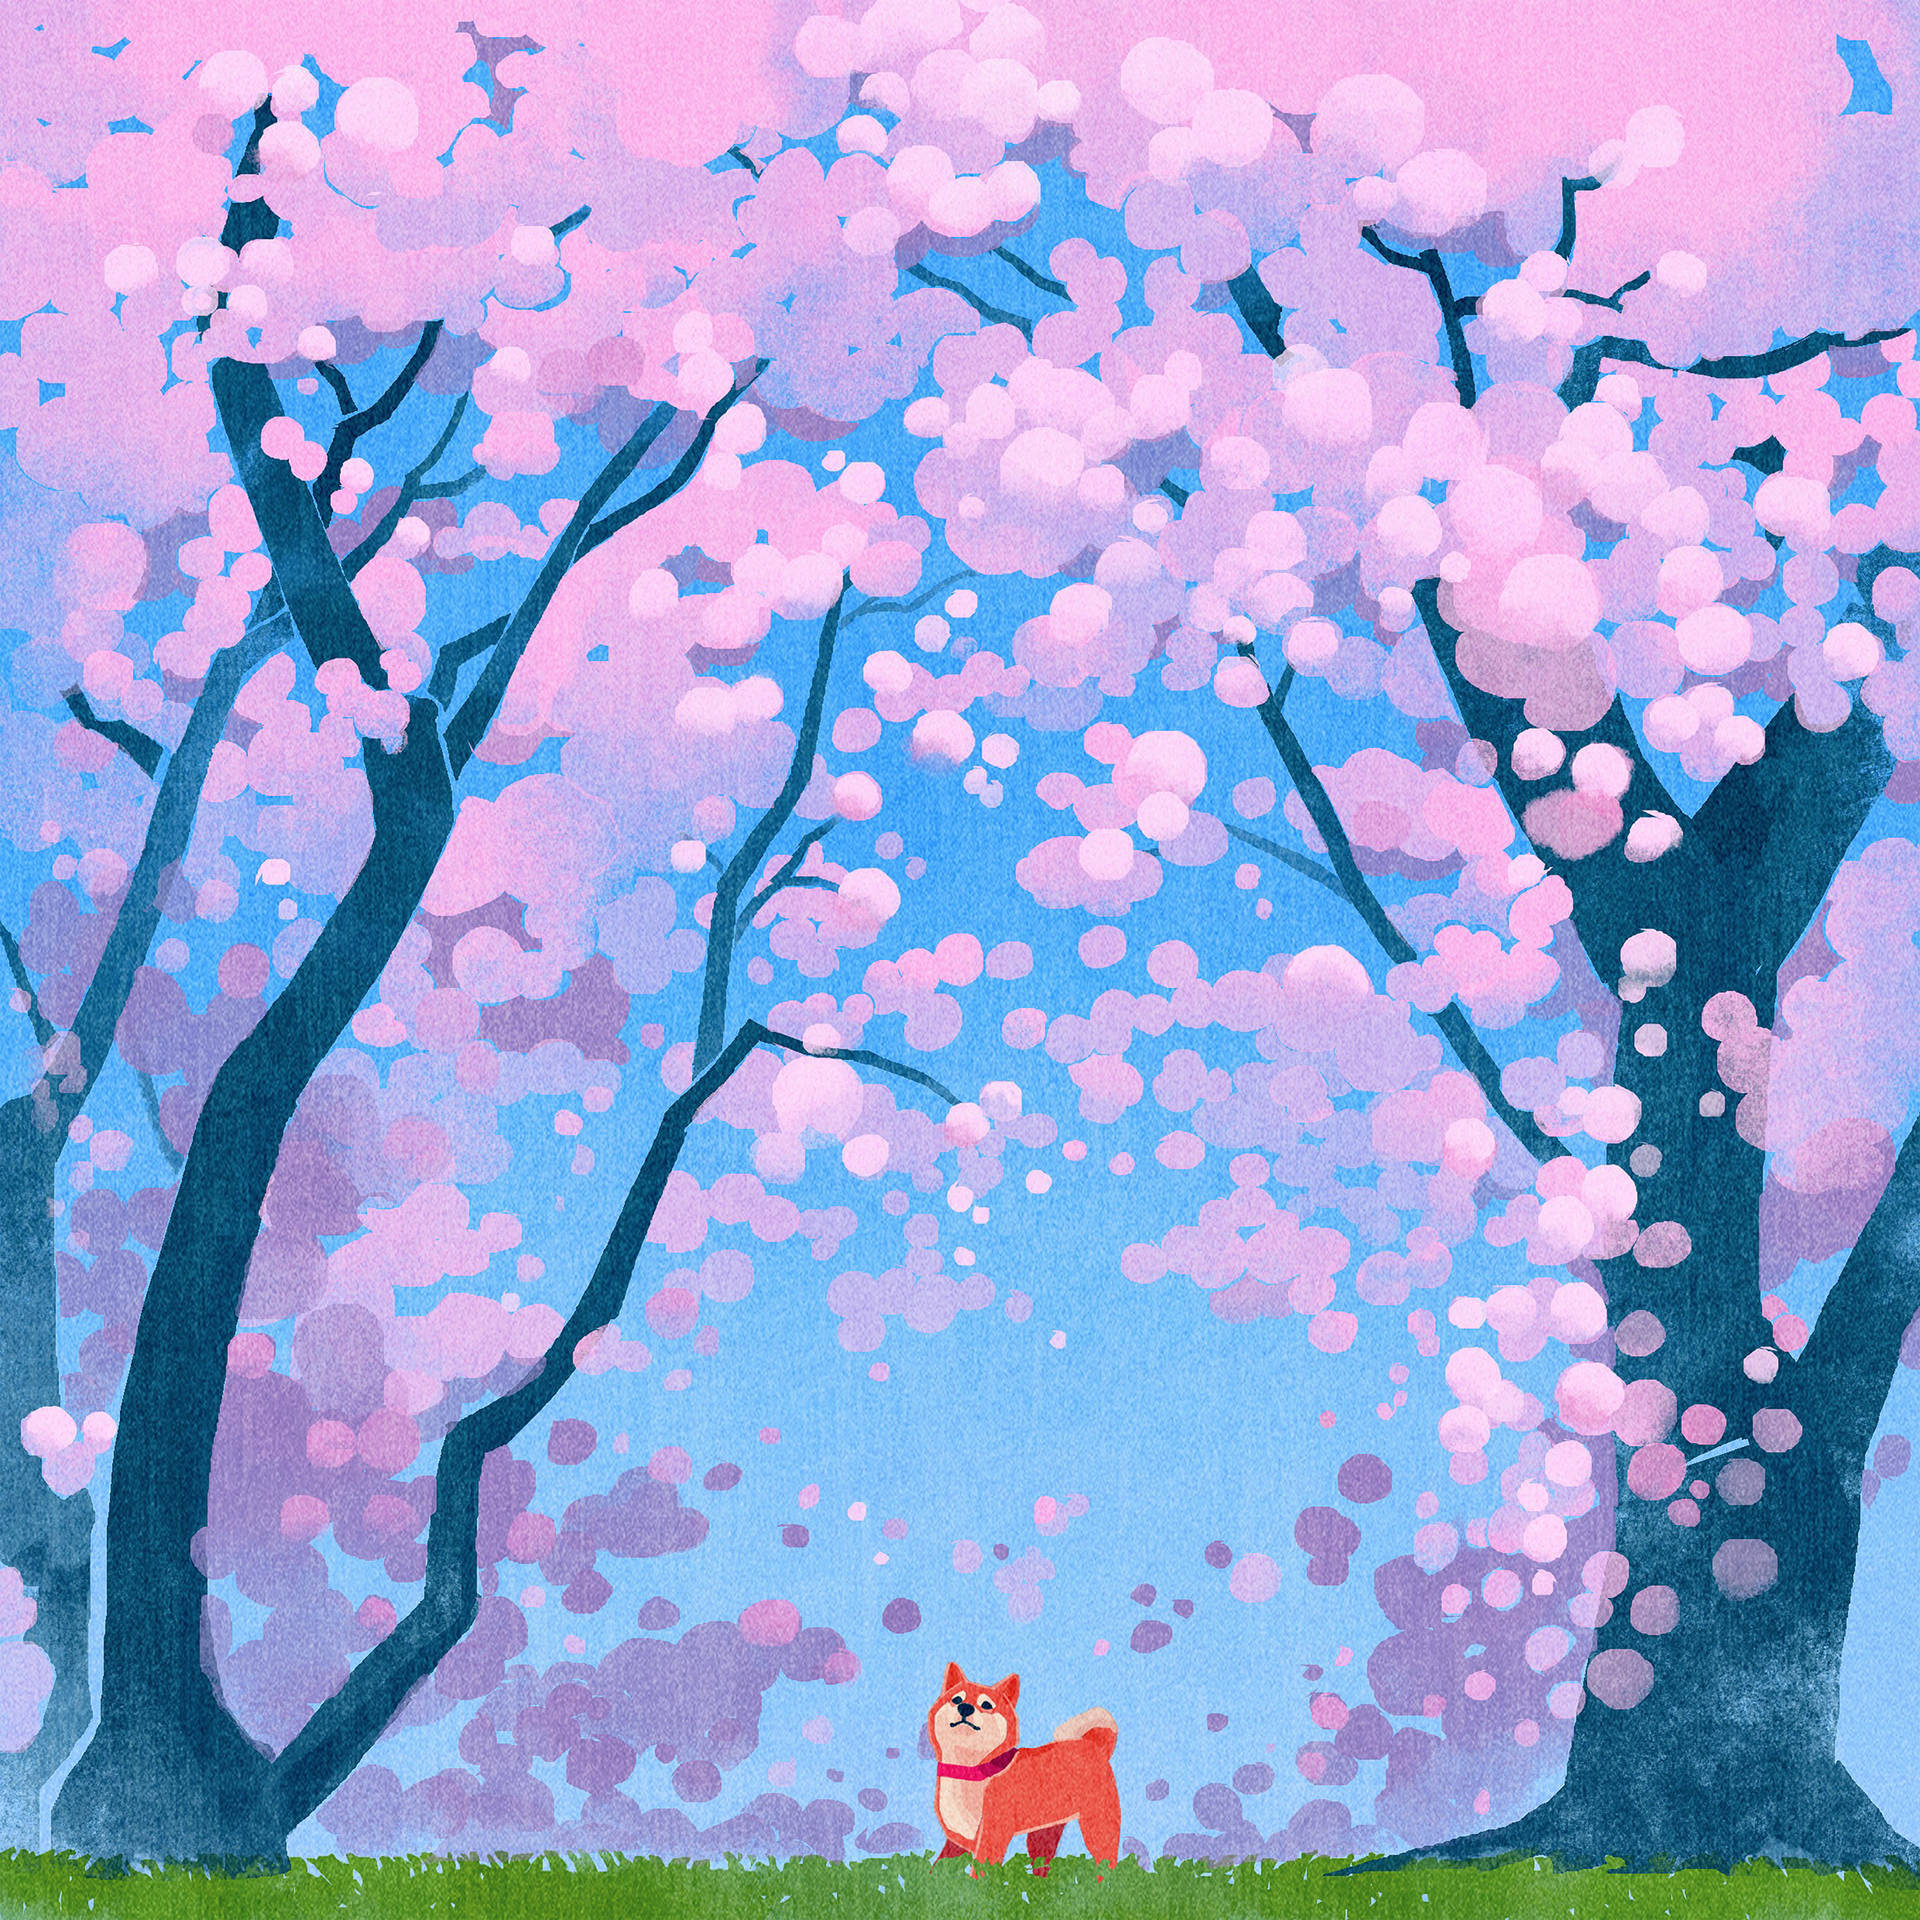 Ipad Pro Cute Dog In Cherry Blossoms Background